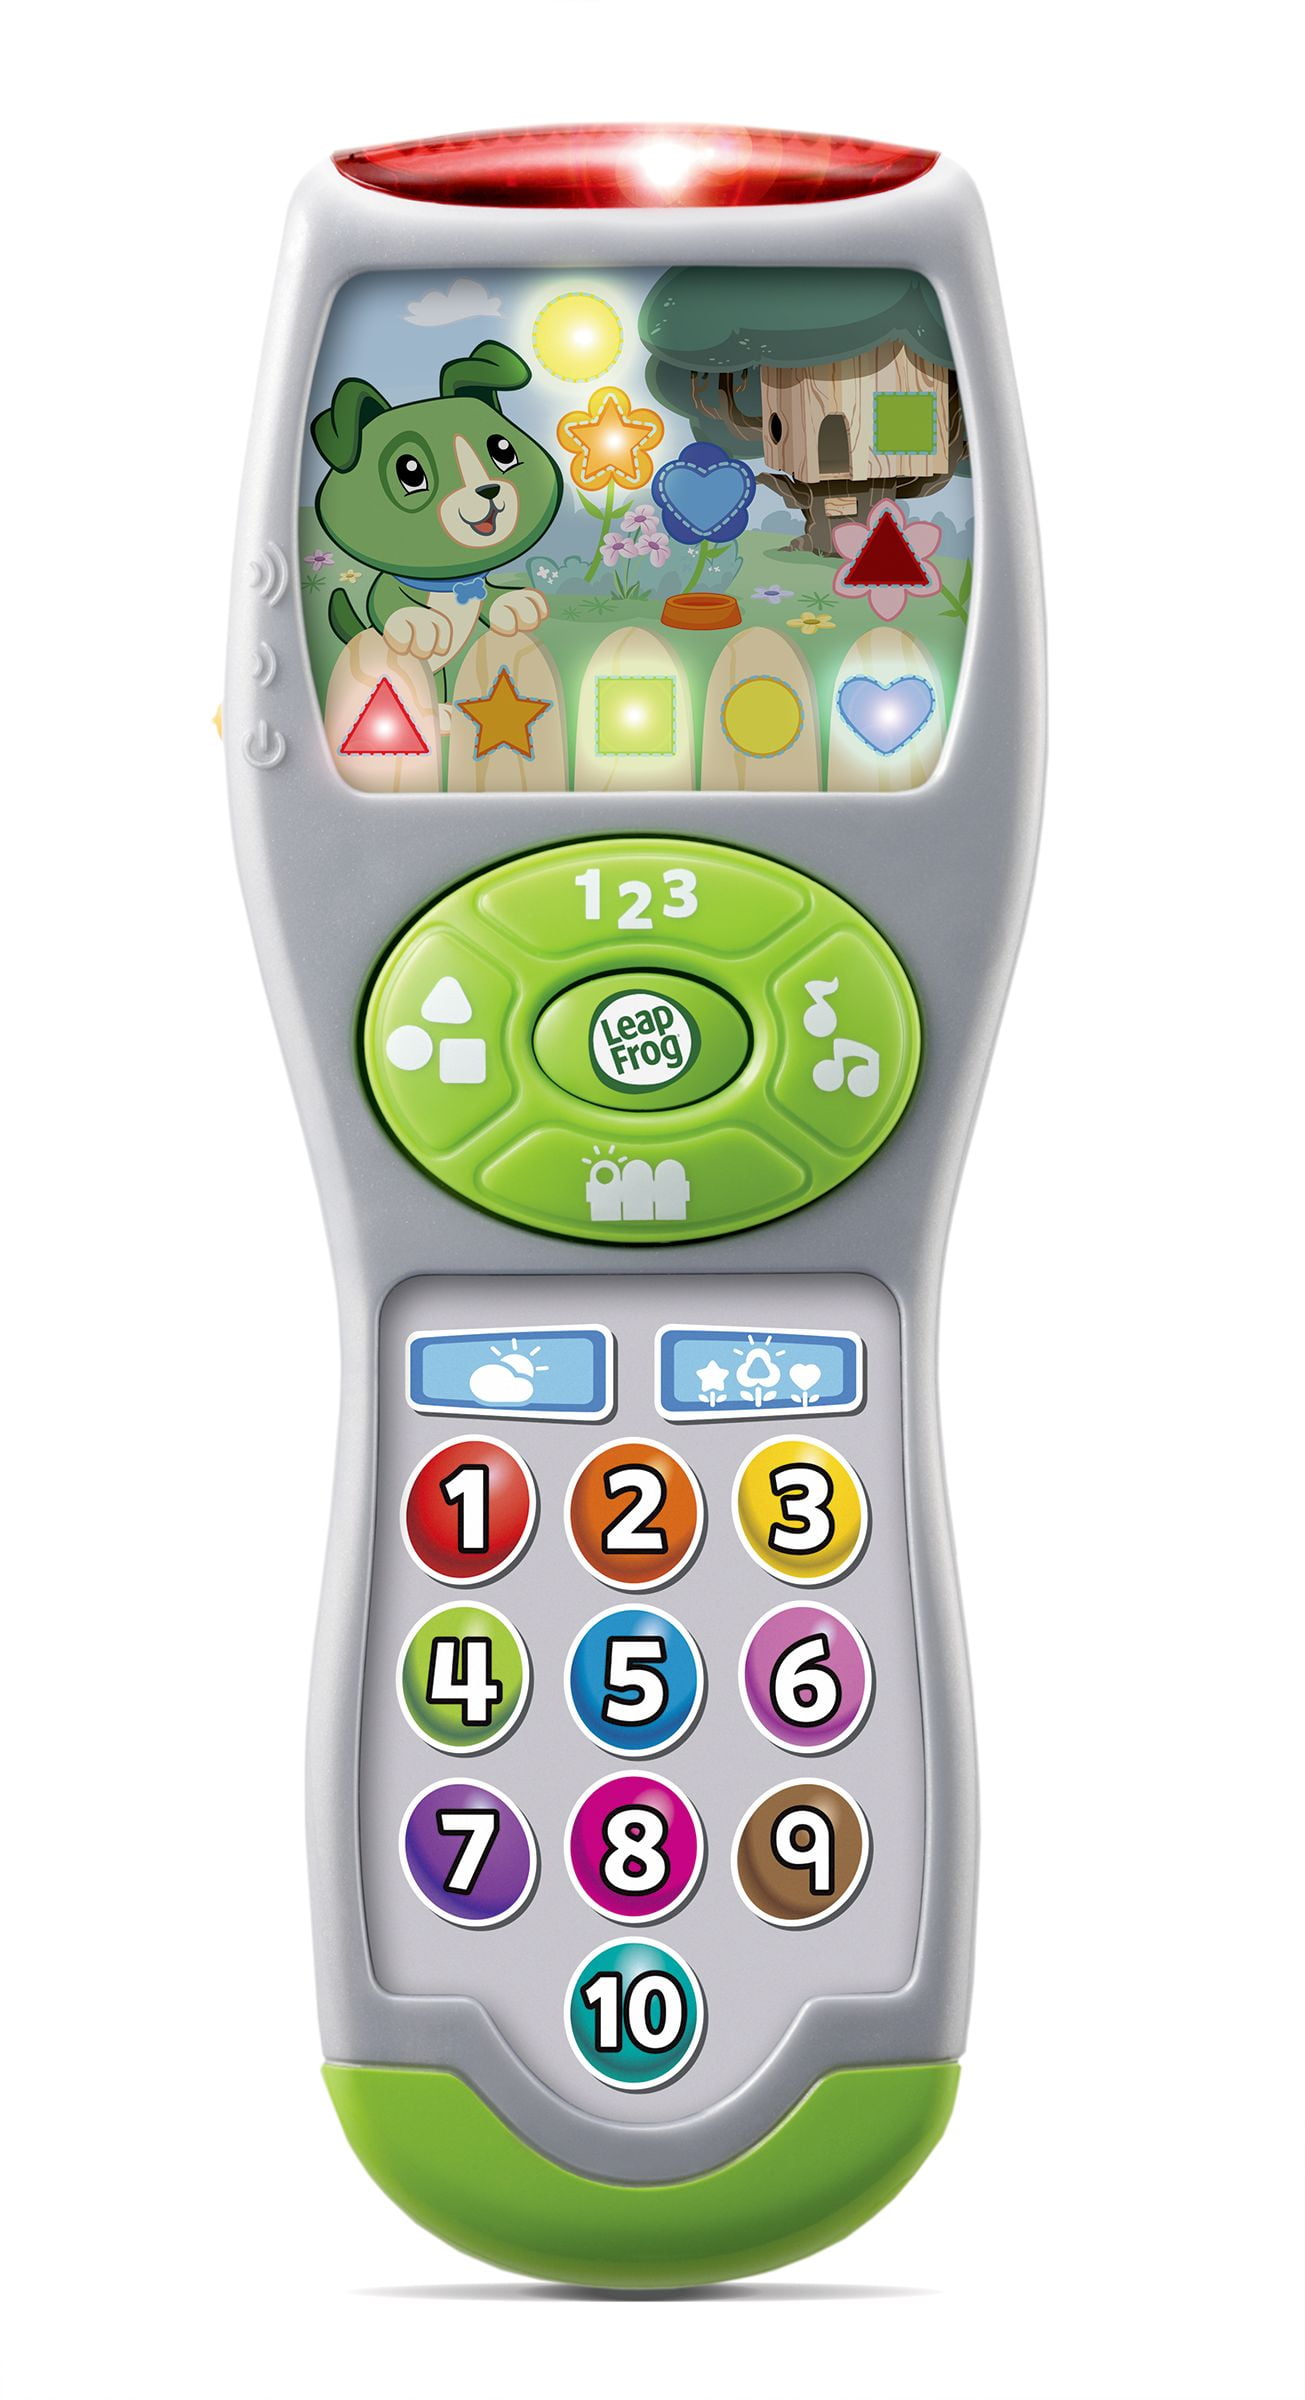 LeapFrog Scout's Learning Lights Remote 